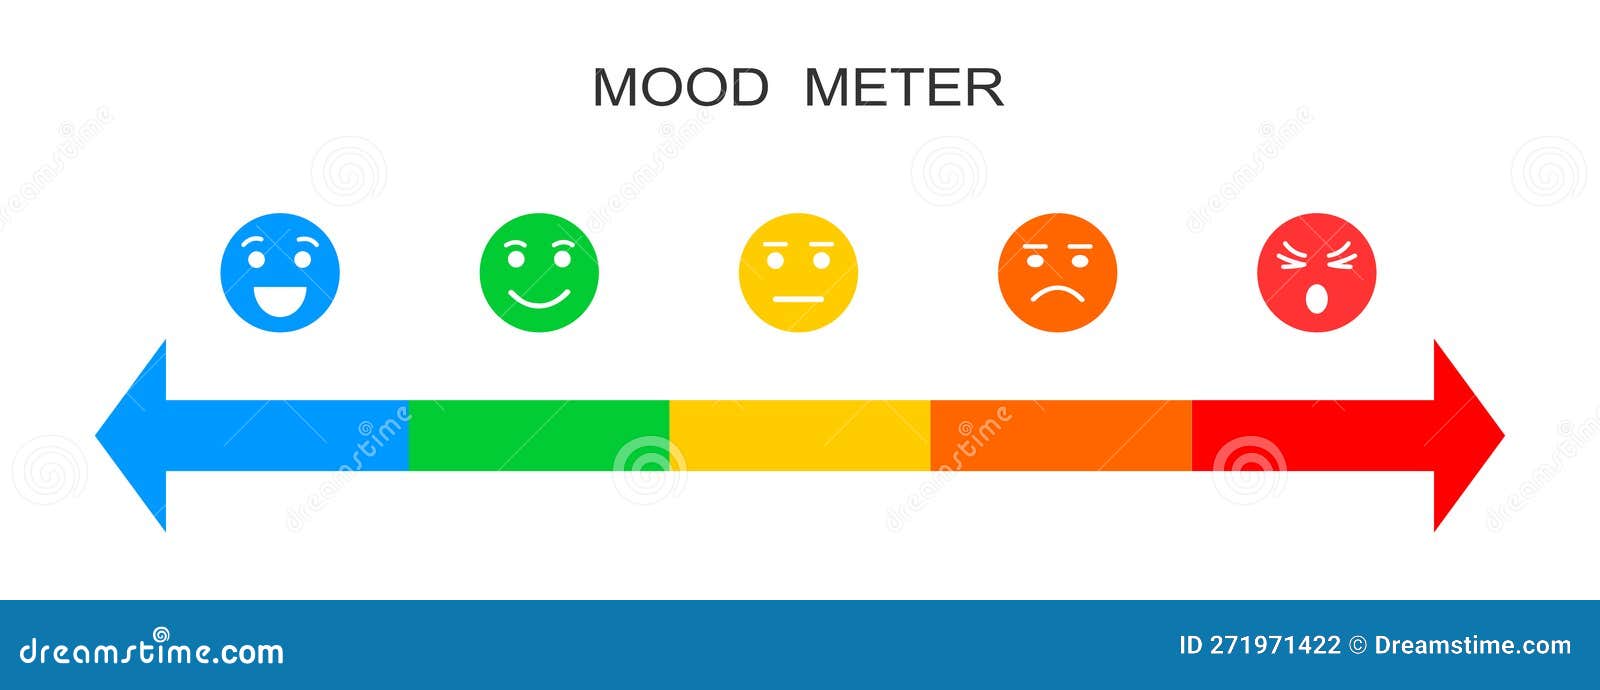 Mood Meter. Horizontal Scale with Colorful Faces with Different ...